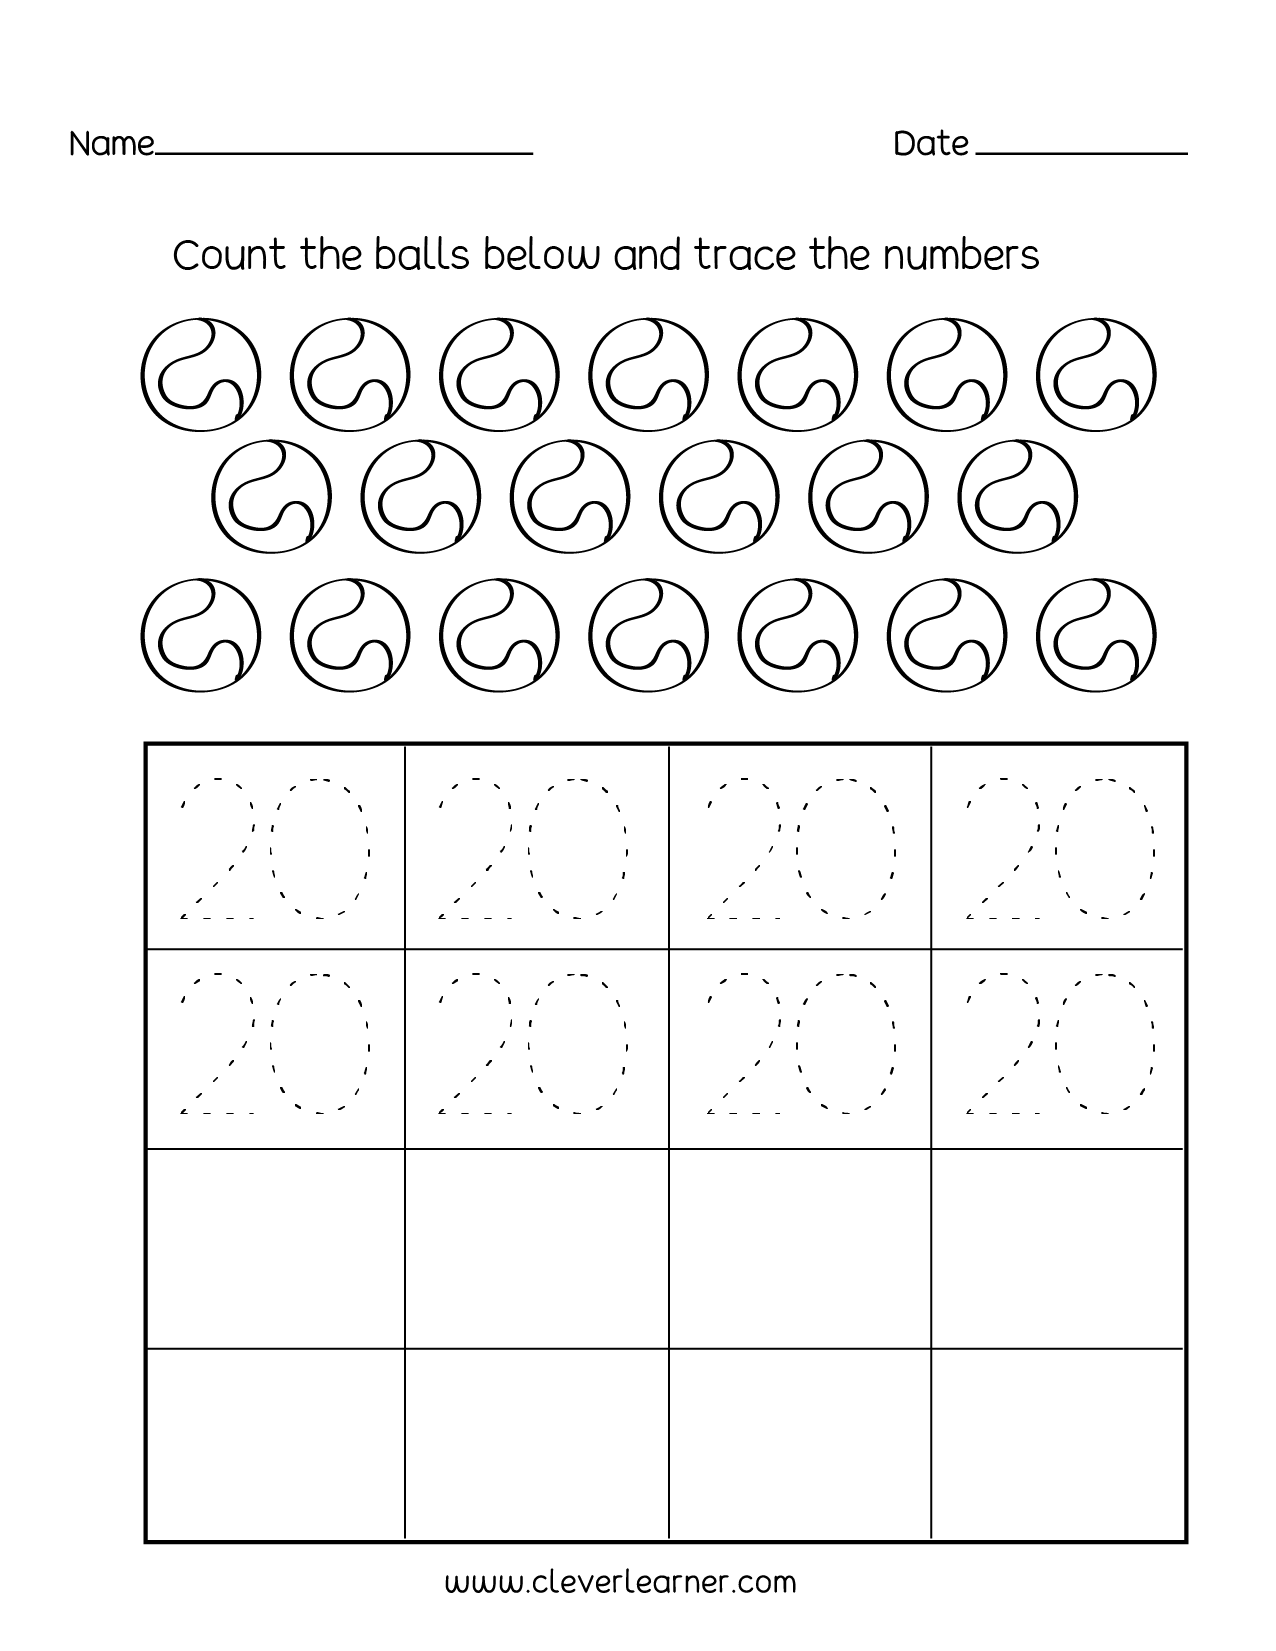 number-20-count-and-trace-worksheet-twisty-noodle